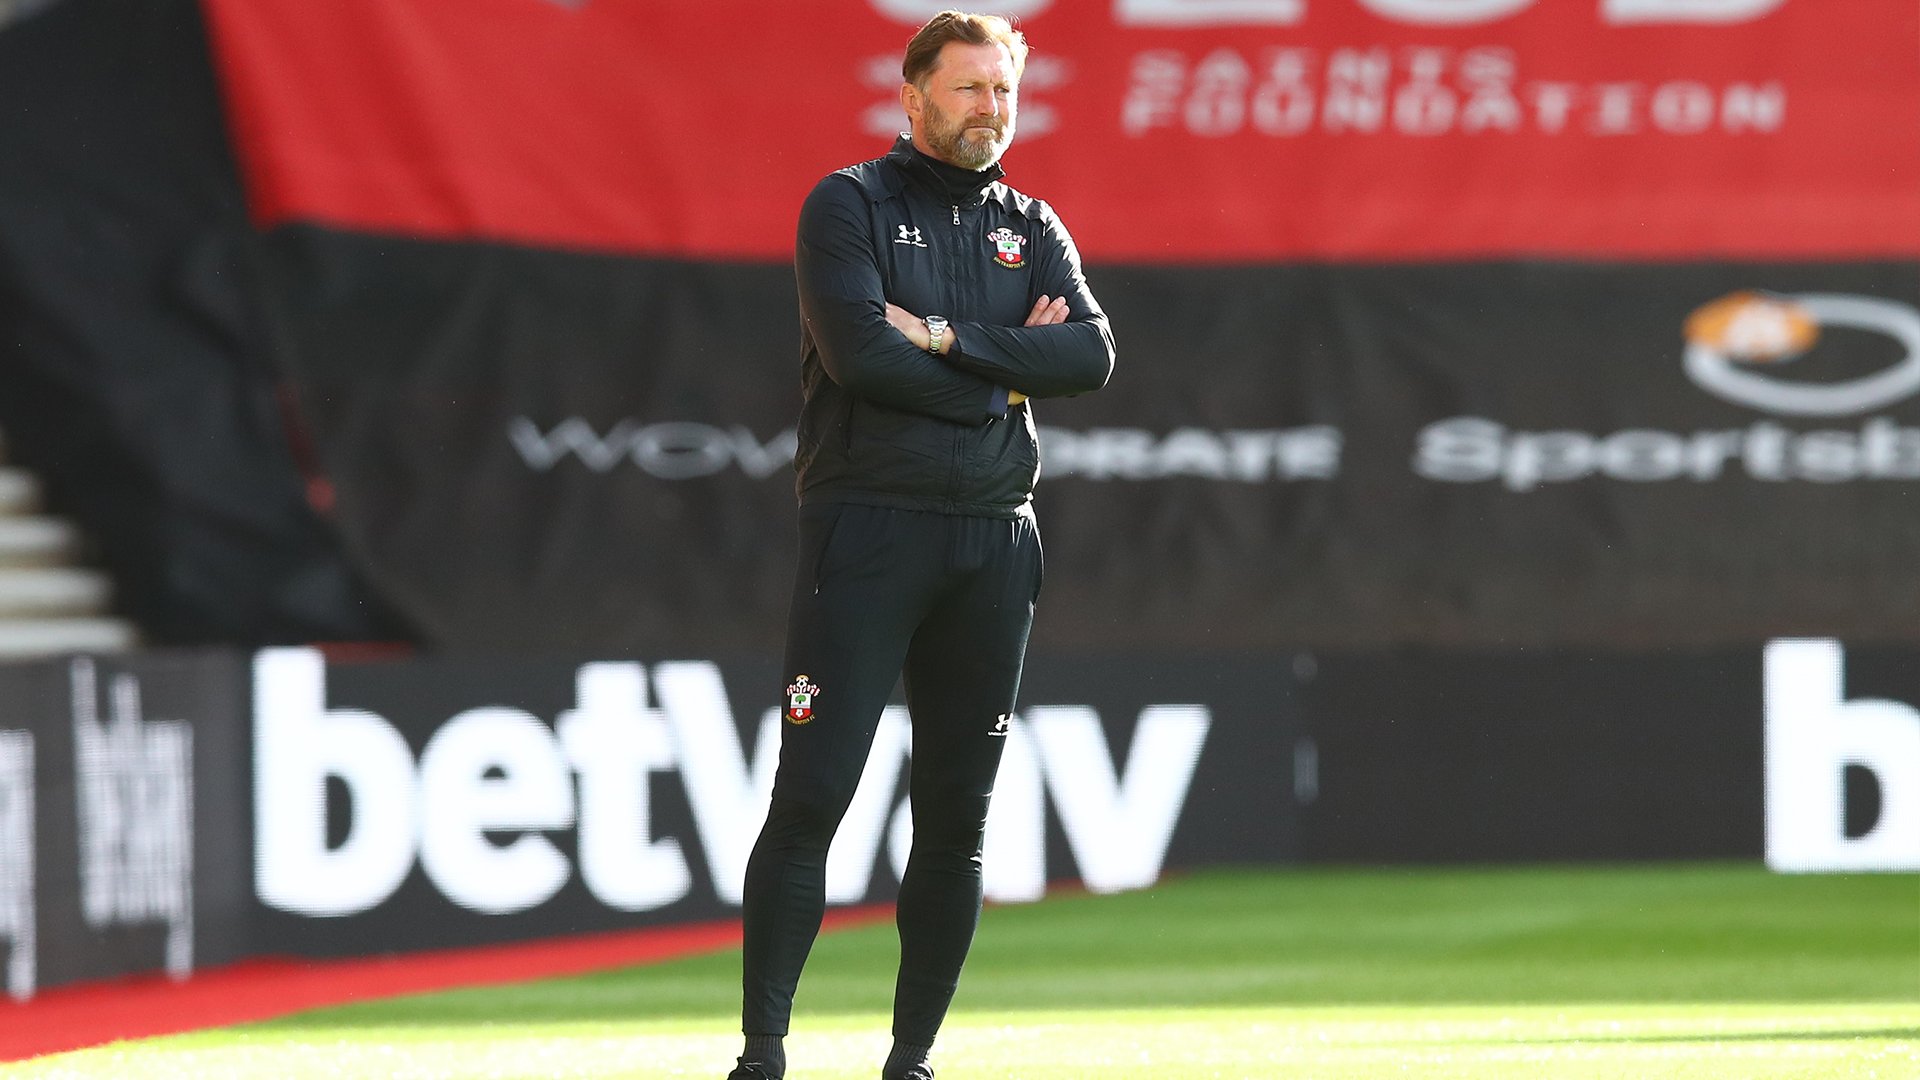 Southampton are more than Danny Ings and we need others to step up, proclaims Ralph Hasenhuttl